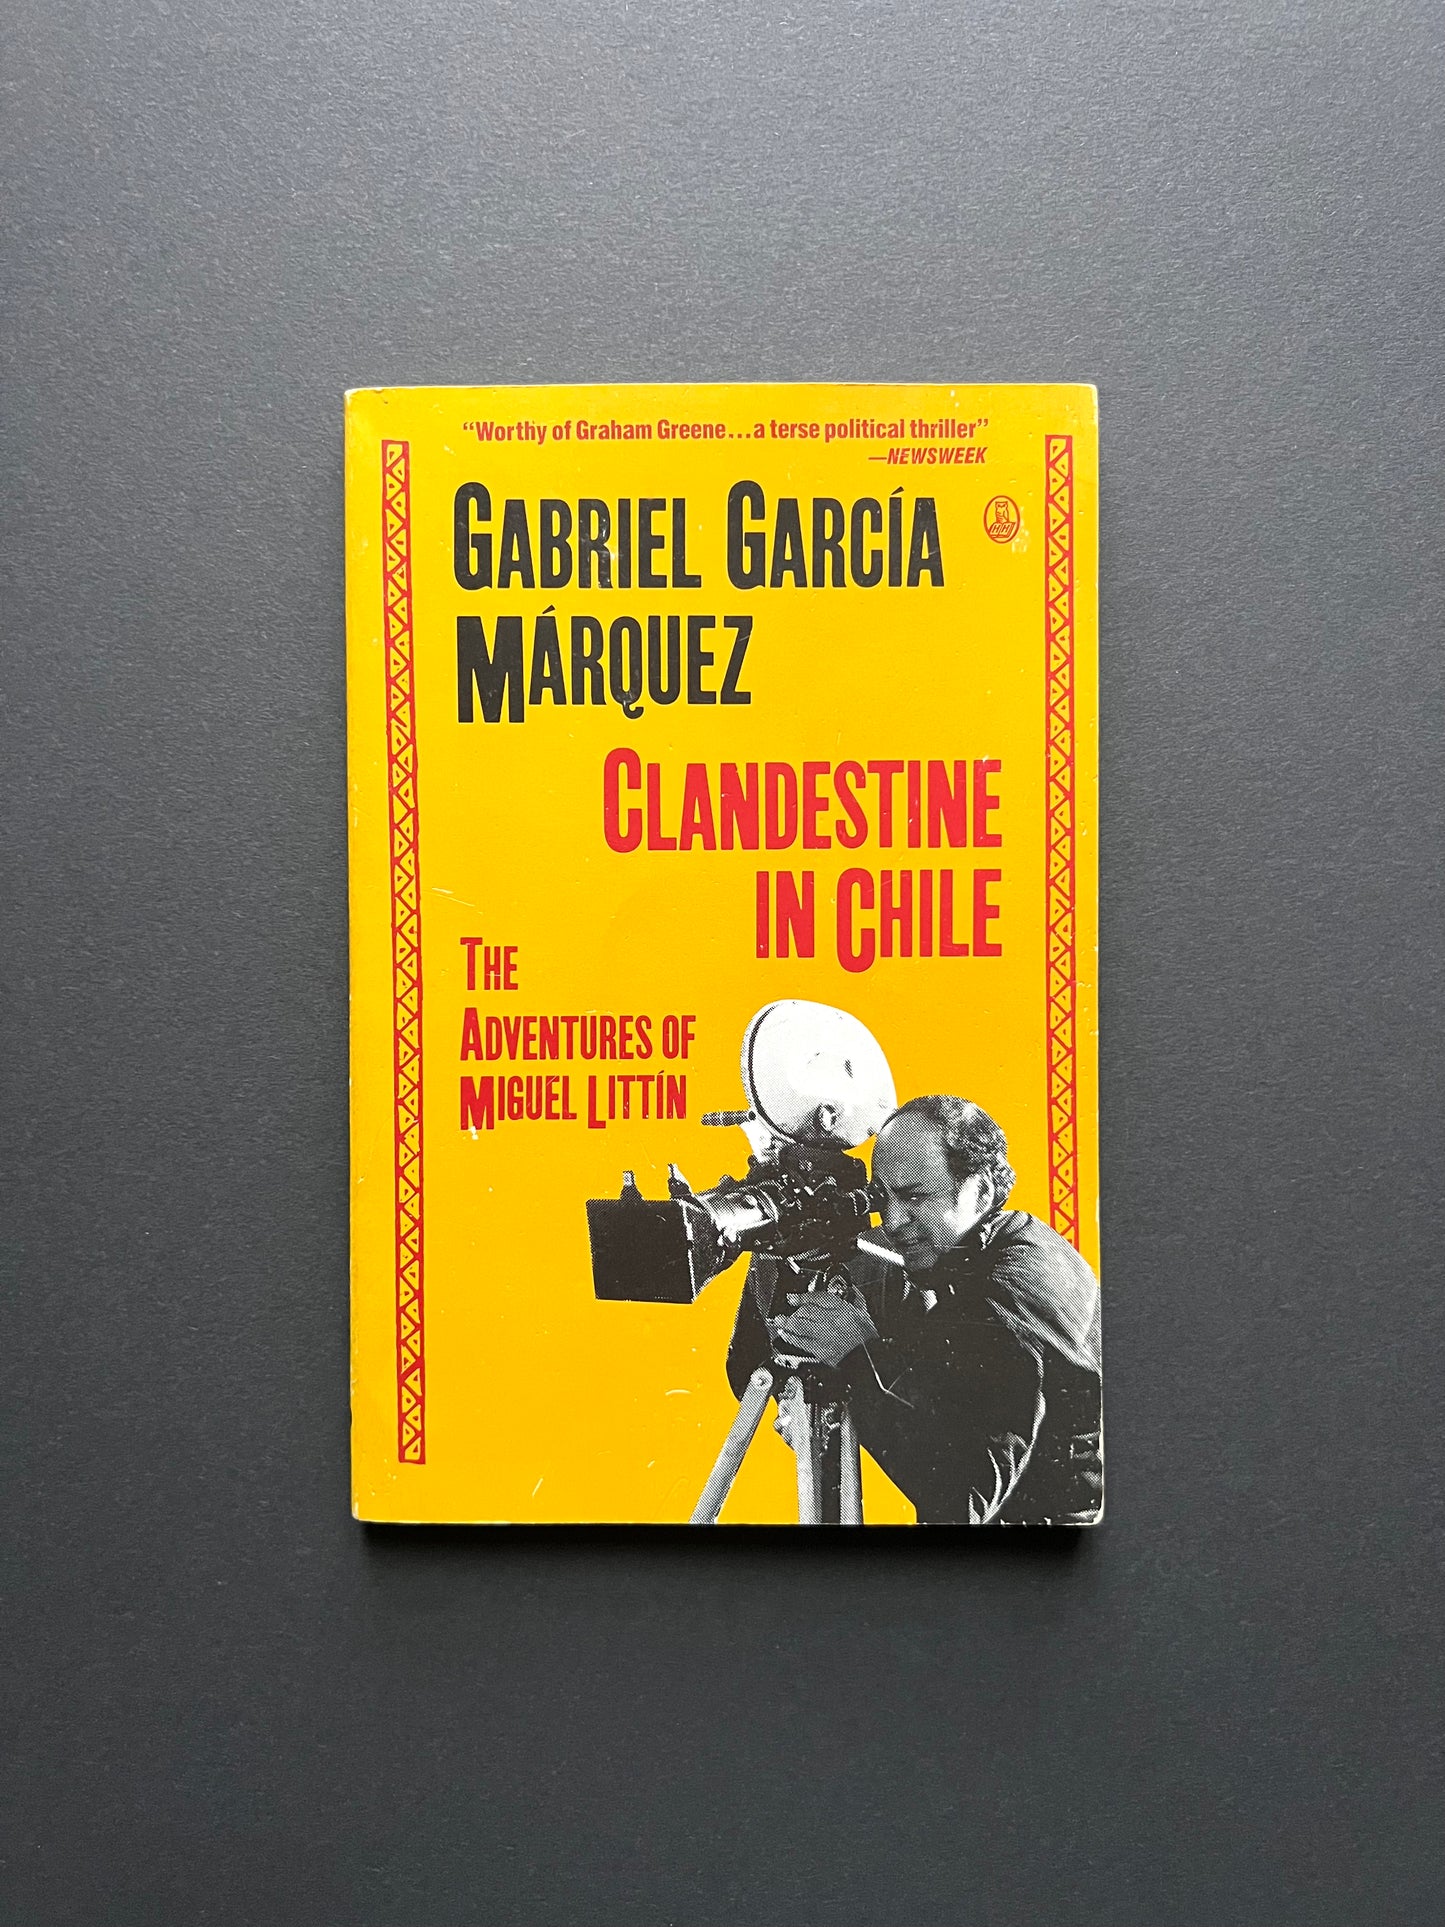 Clandestine in Chile: The Adventures of Miguel Littín